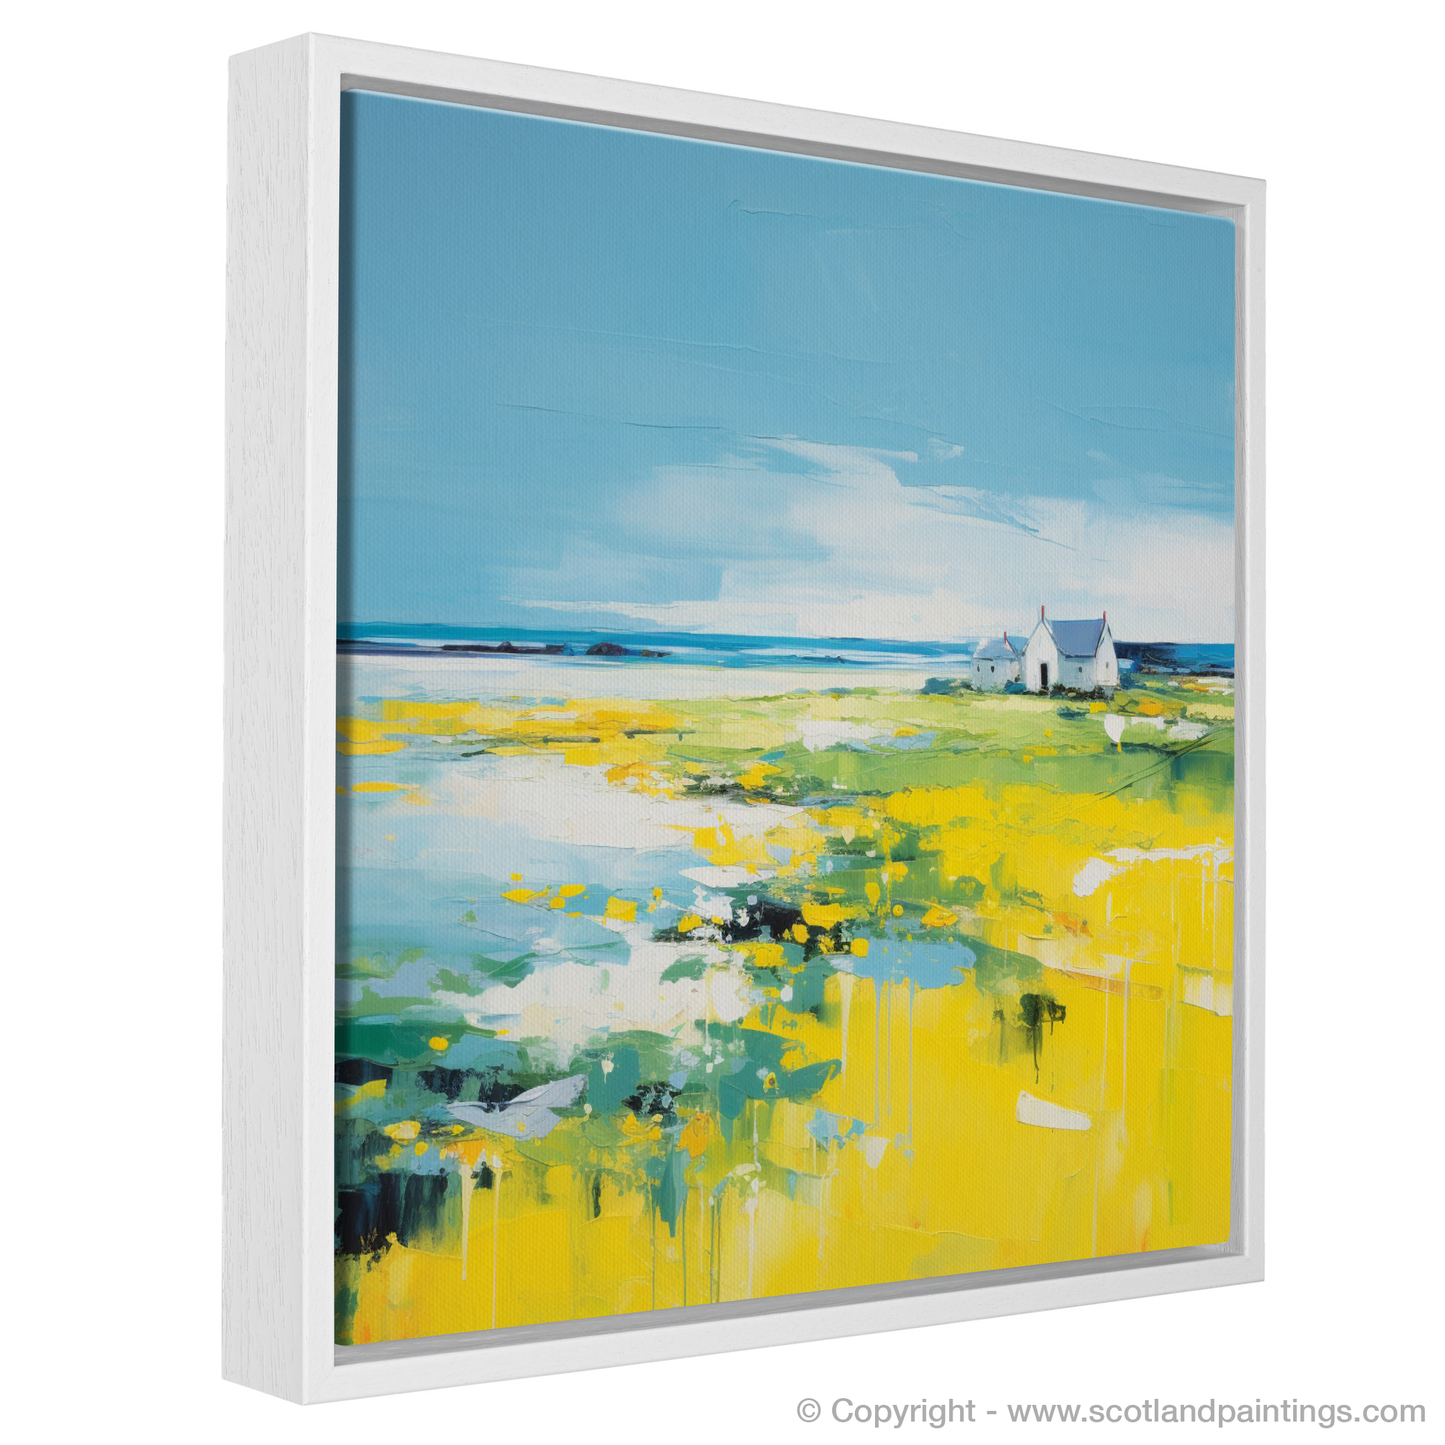 Painting and Art Print of Isle of Tiree, Inner Hebrides in summer entitled "Summer Splendour of Isle of Tiree".